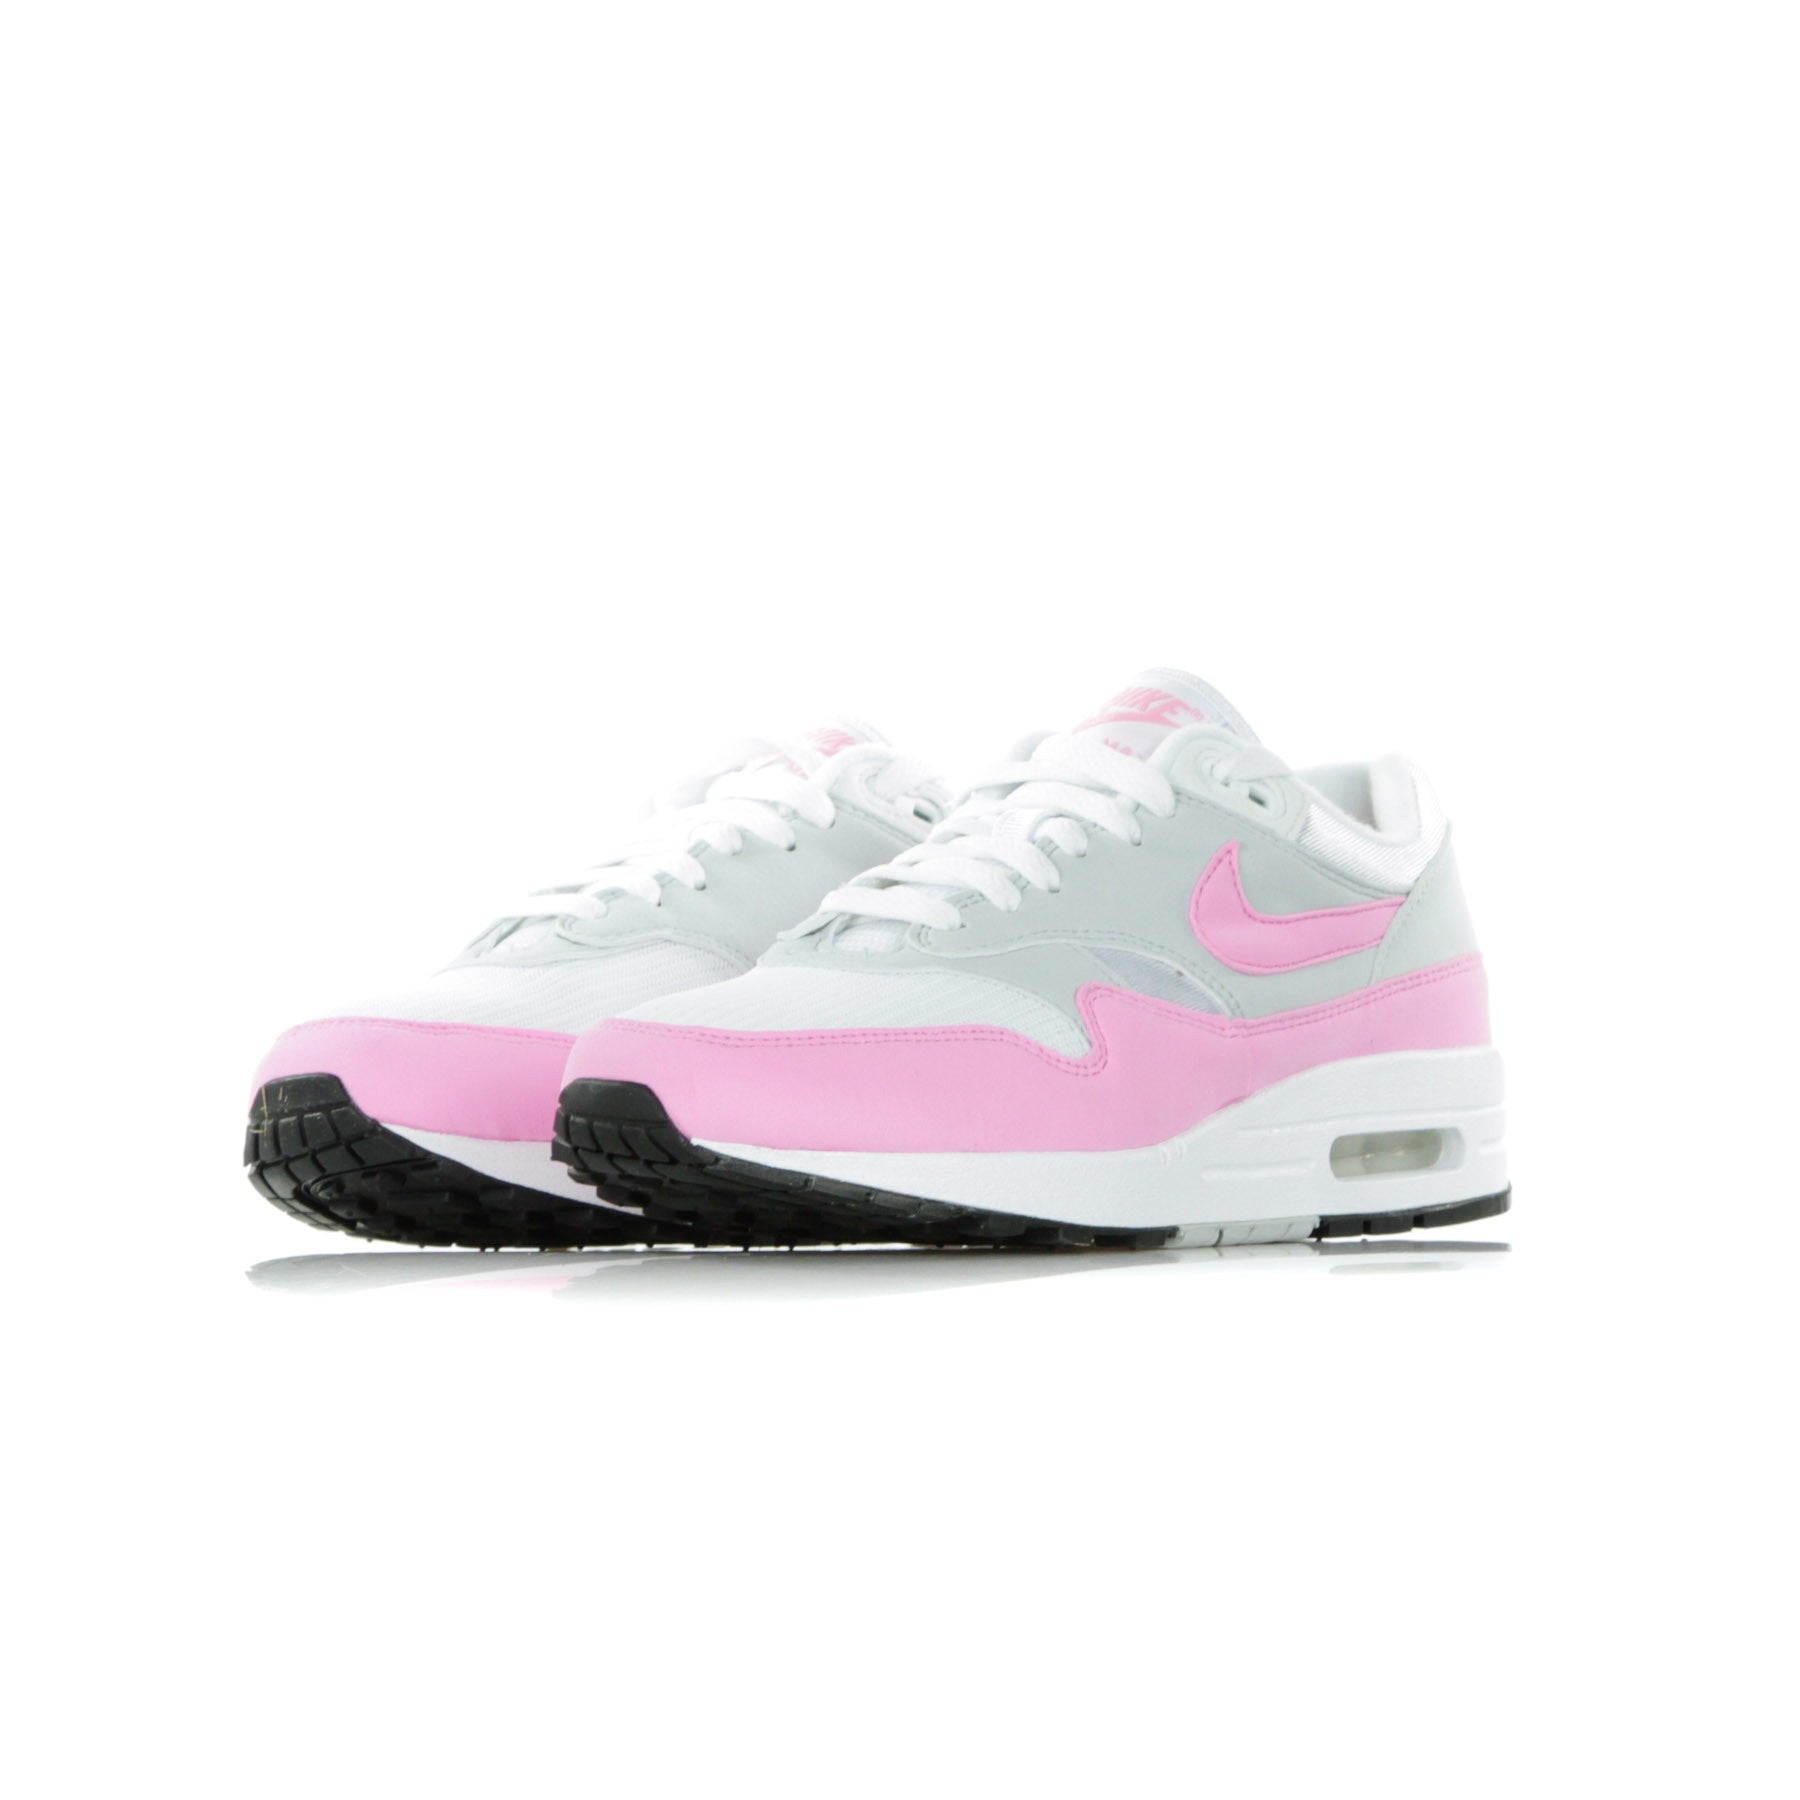 W Air Max 1 Ess White/psychic Pink Women's Low Shoe